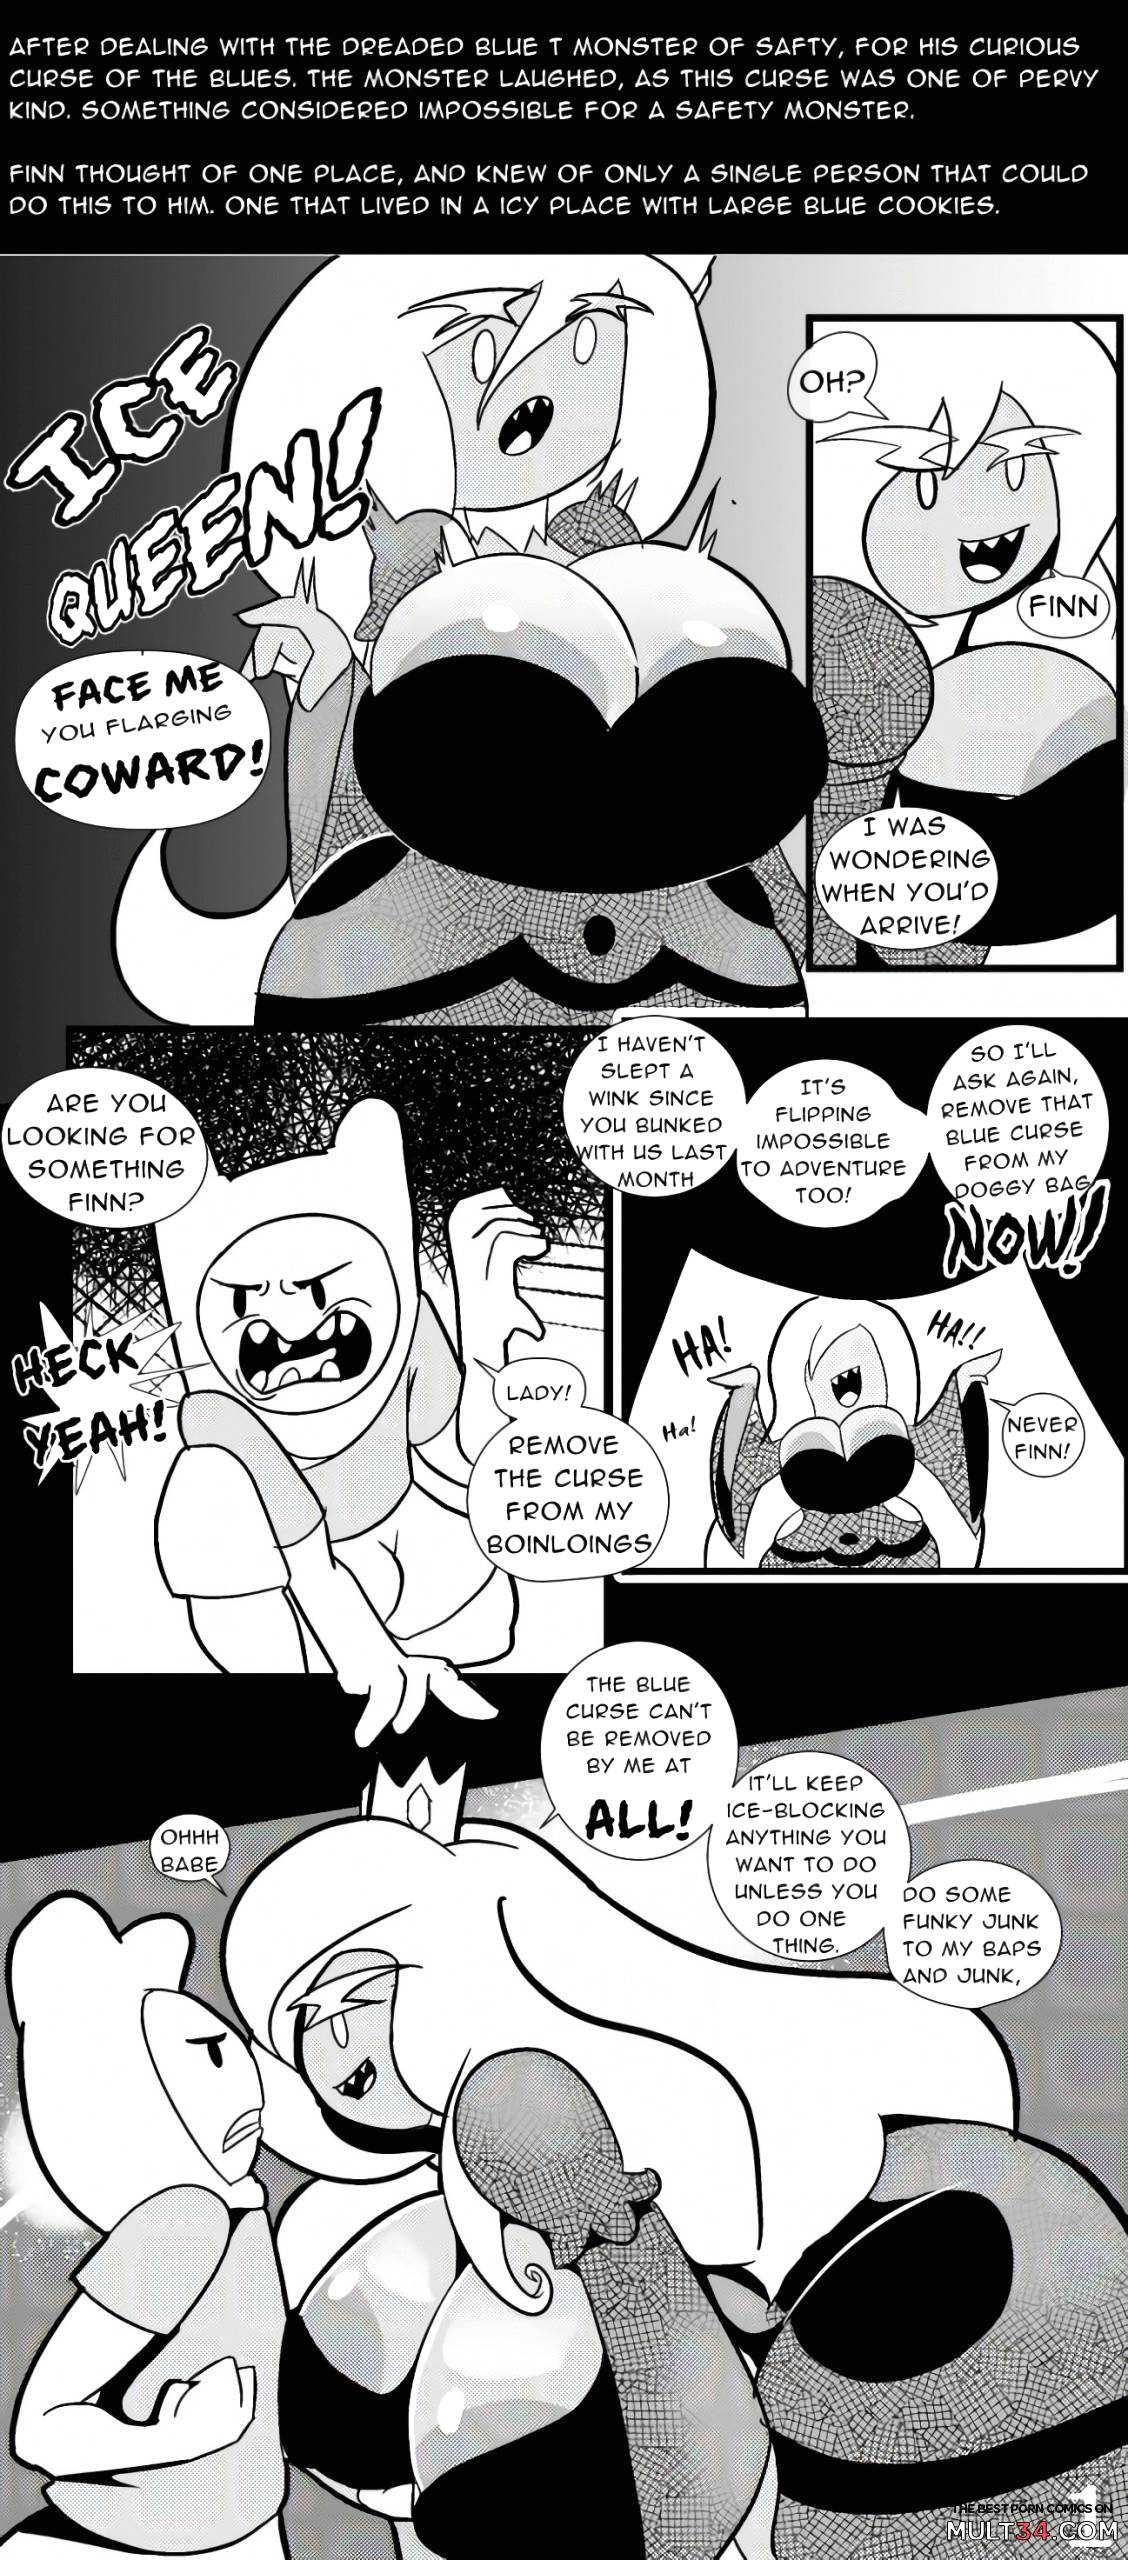 Mooning Time - Penlink page 2